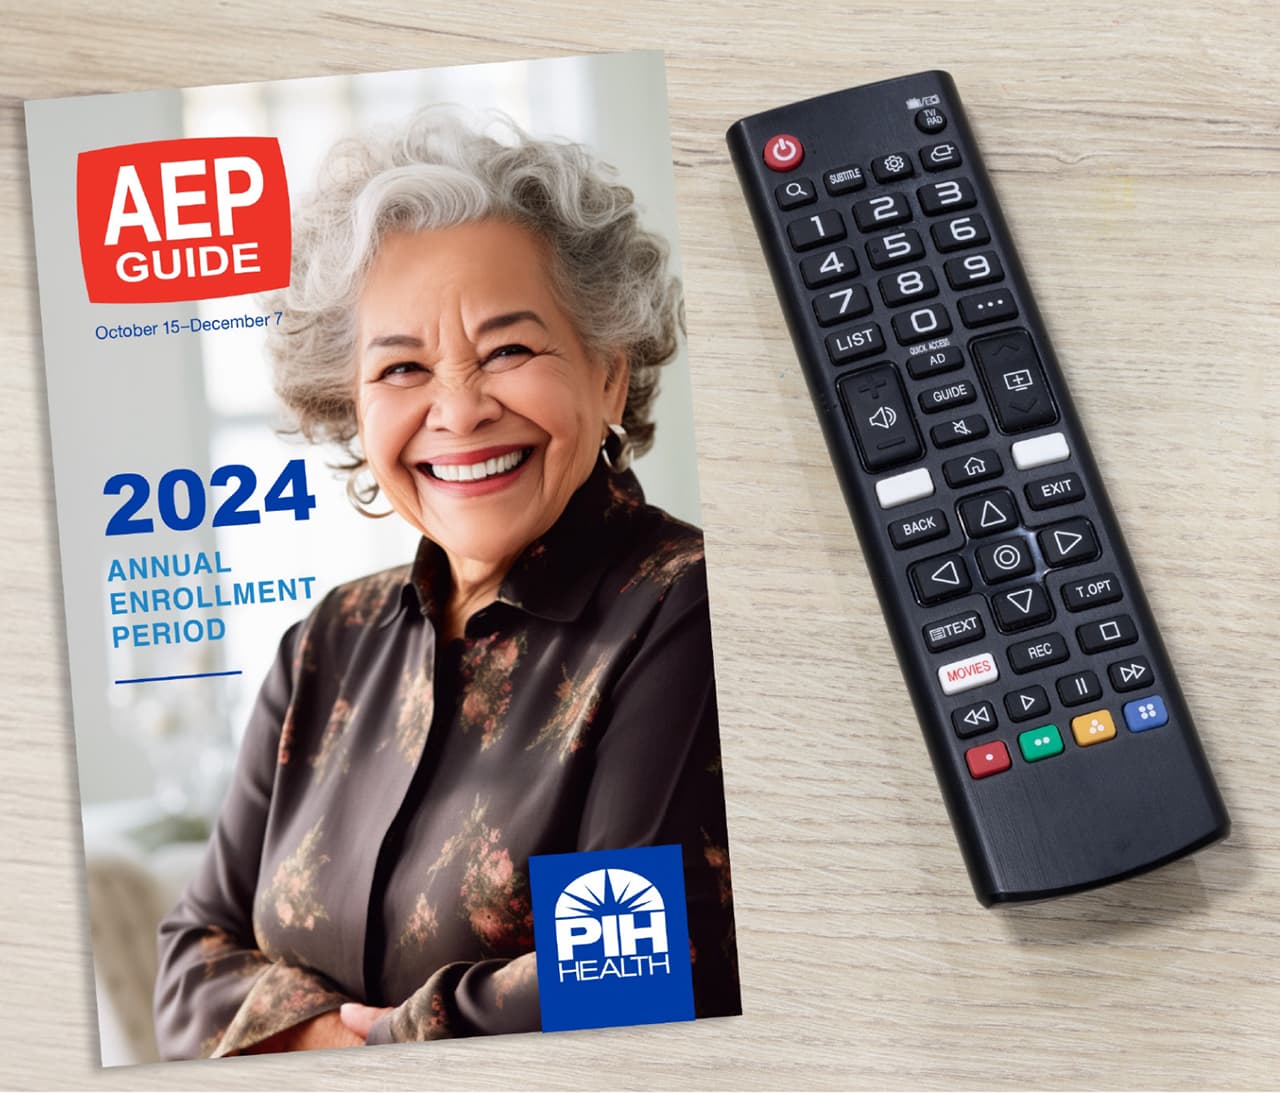 AEP Guide and TV Remote